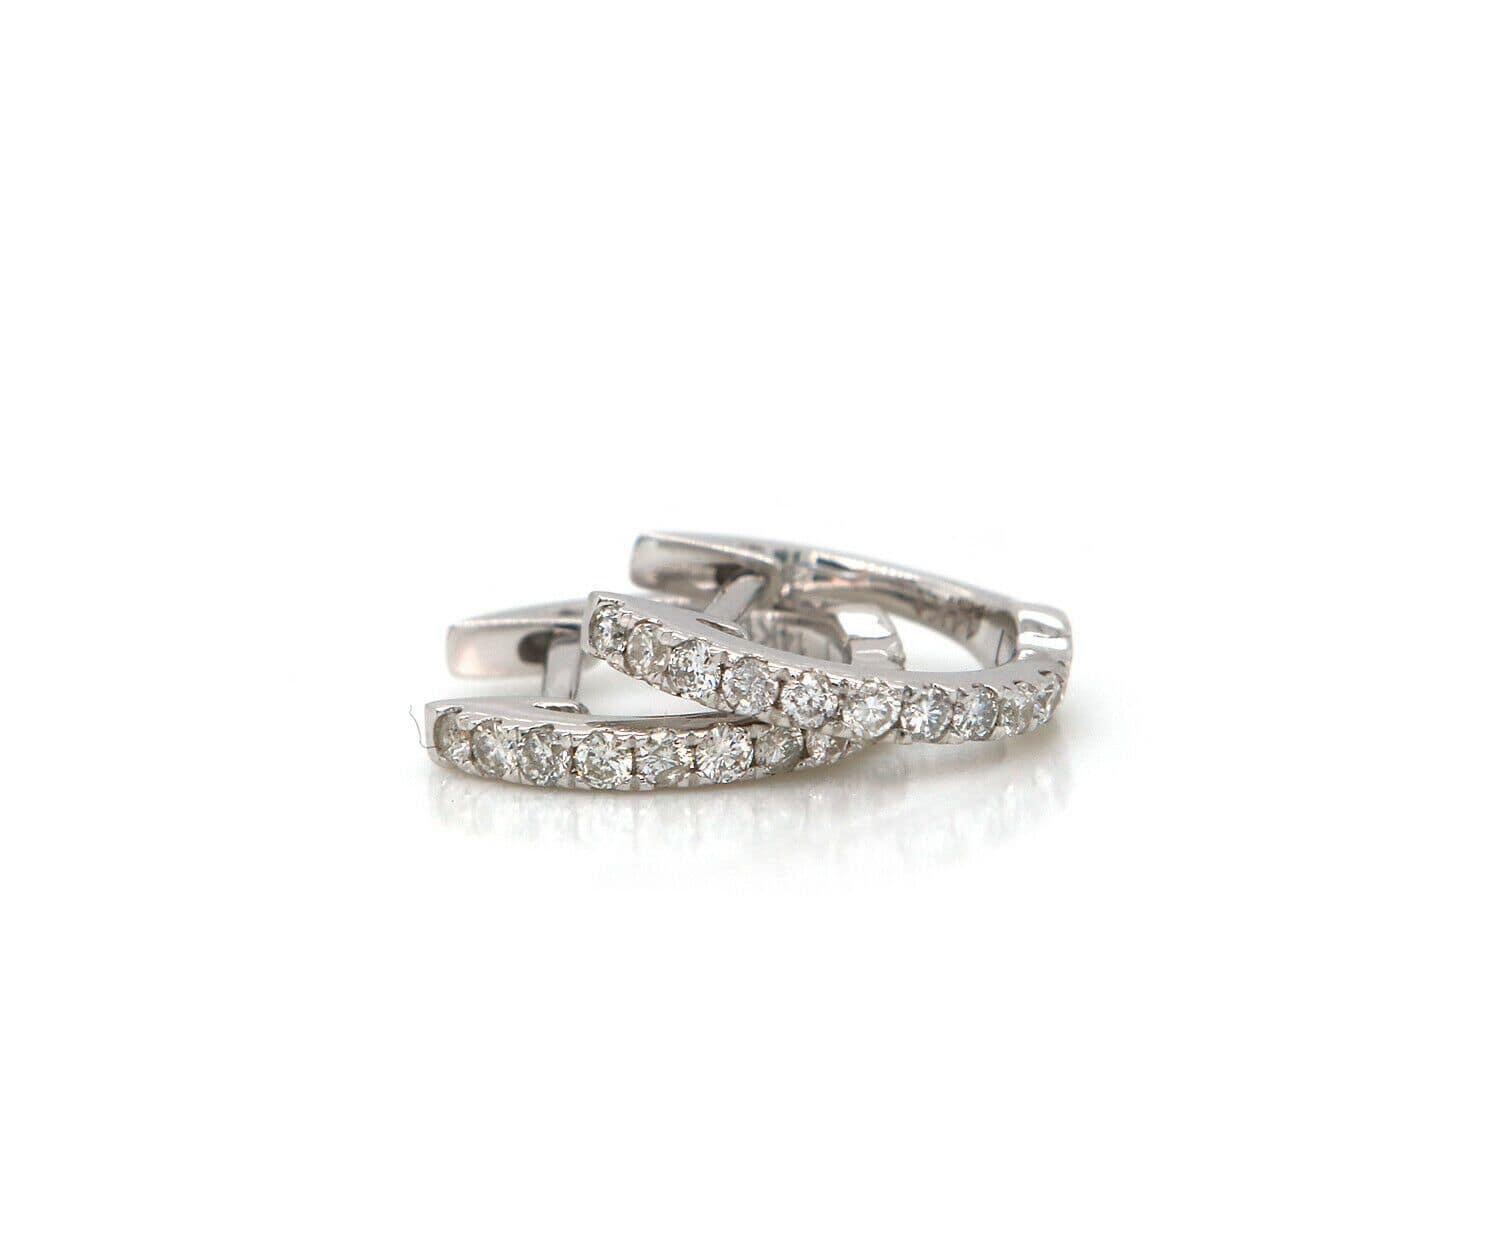 New 0.22ctw Diamond Petite Huggie Earrings in 14K

Diamond Petite Huggie Earrings
14K White Gold
Diamonds Carat Weight: Approx. 0.22ctw
Earring Dimensions: Approx. 8.0 X 12.0 MM
Weight: Approx. 1.20 Grams
Stamped: 14KT

Condition:
Offered for your